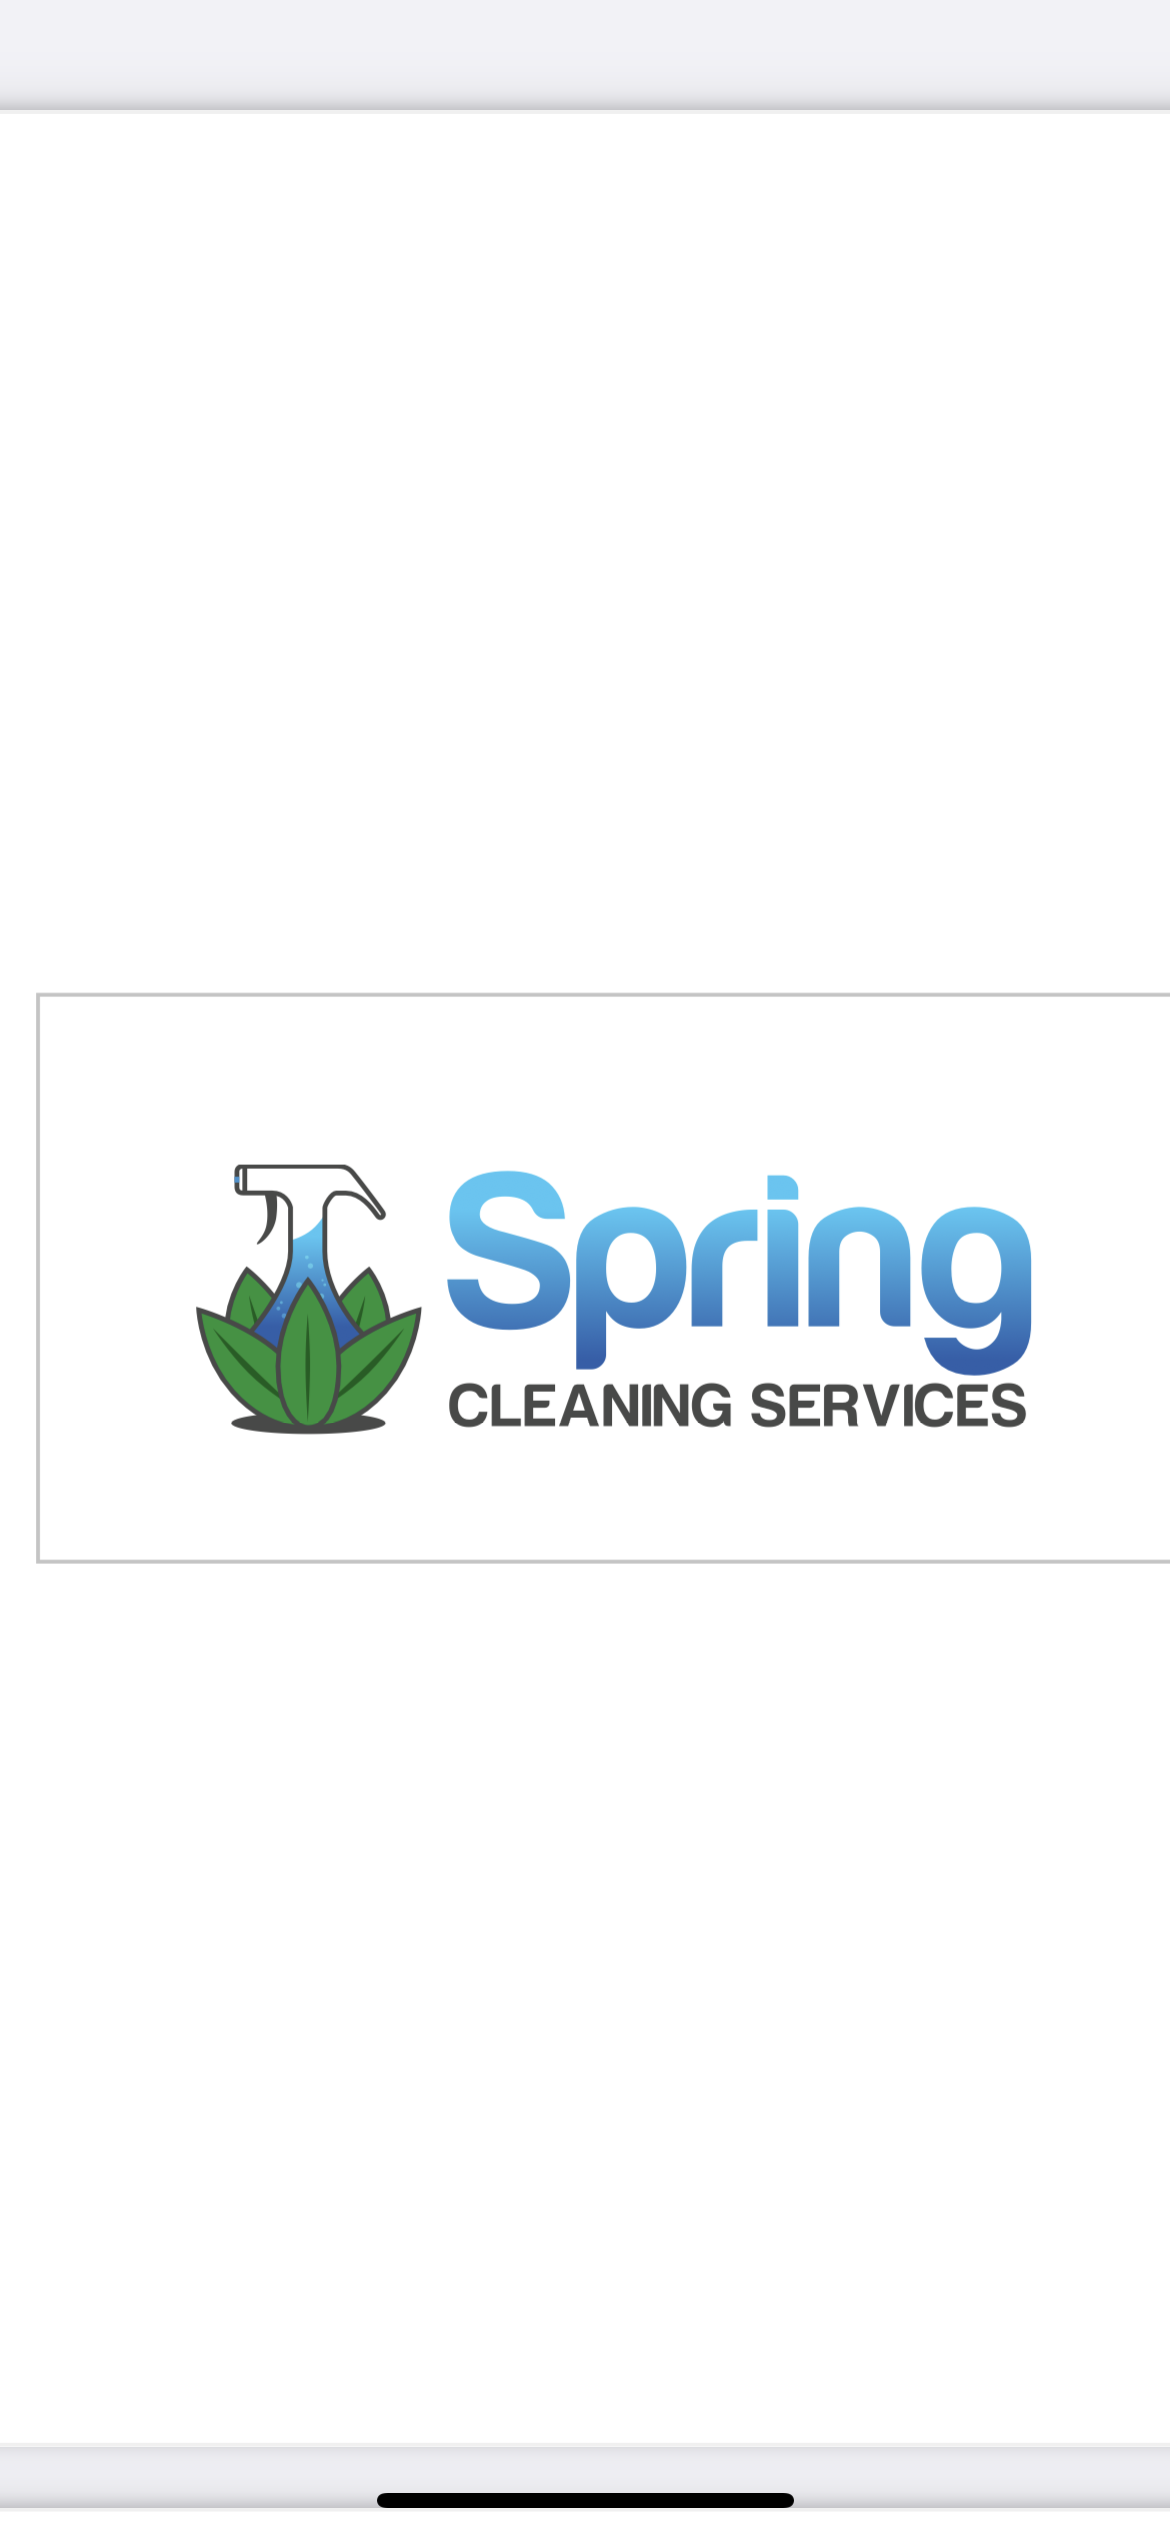 Spring Cleaning Services Logo